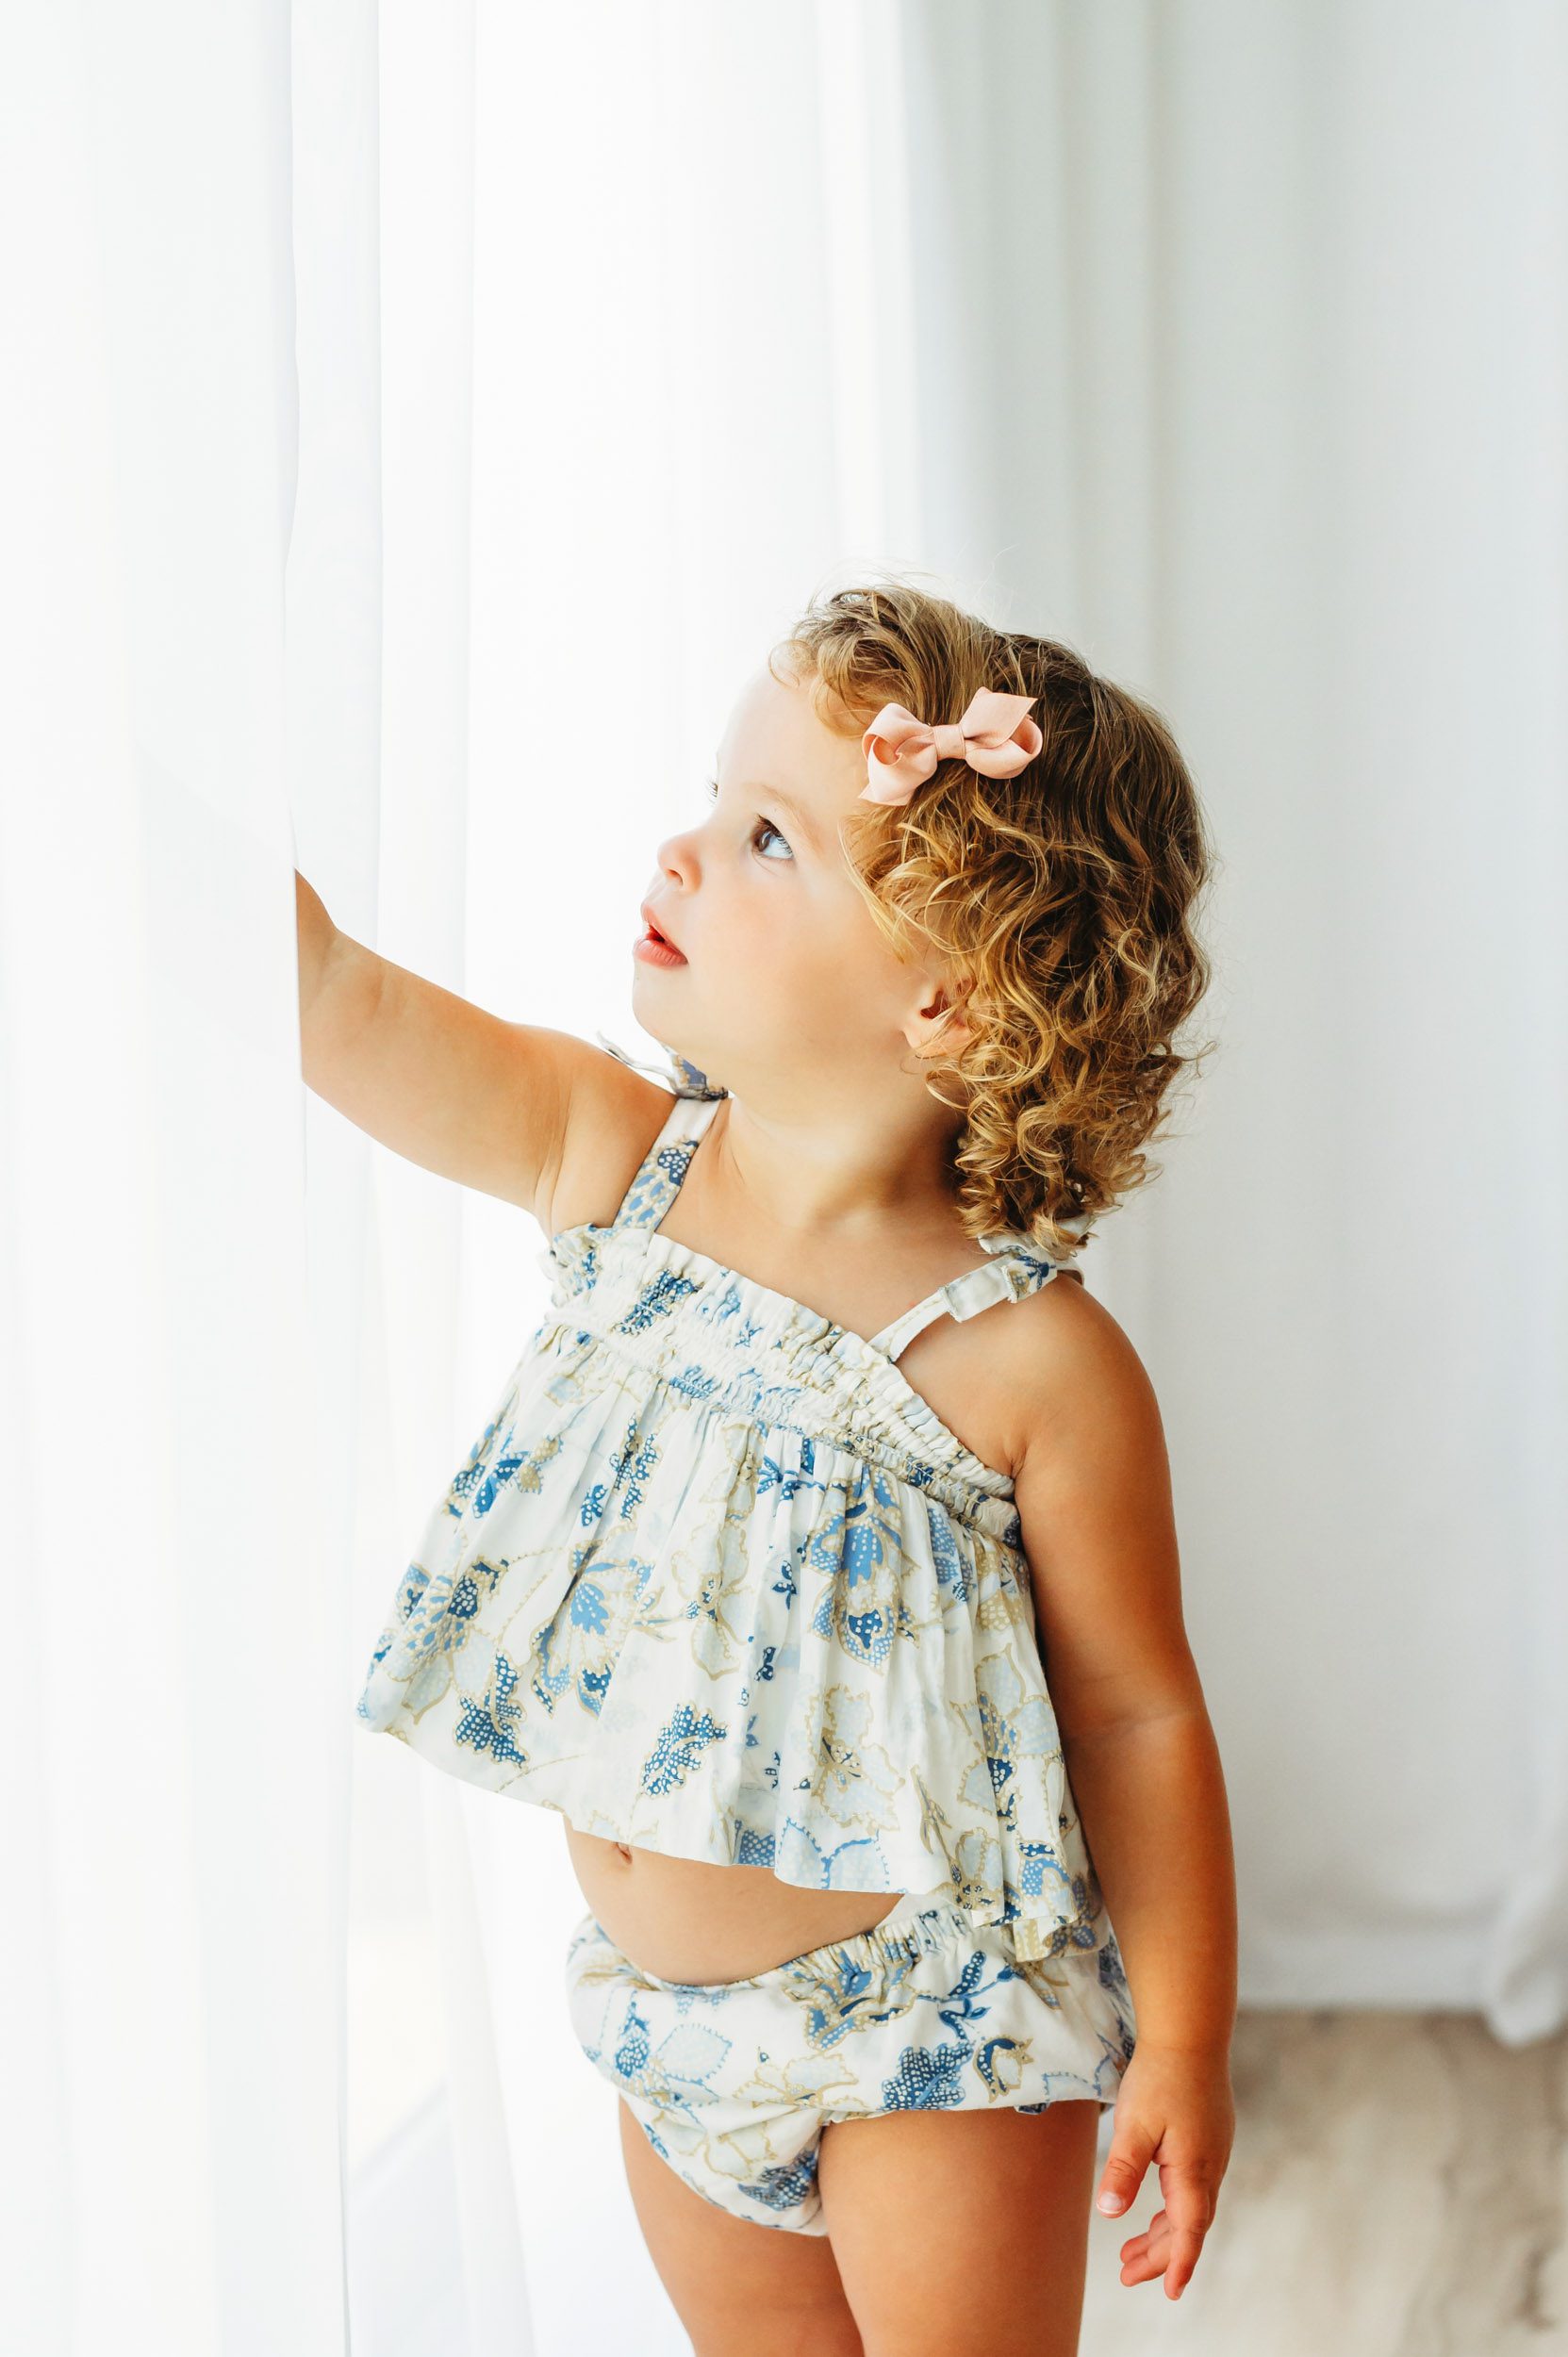 a toddler wearing a blue and gold floral outfit standing in front of a wall of windows and reaching up to touch the curtains during a 2nd birthday photoshoot